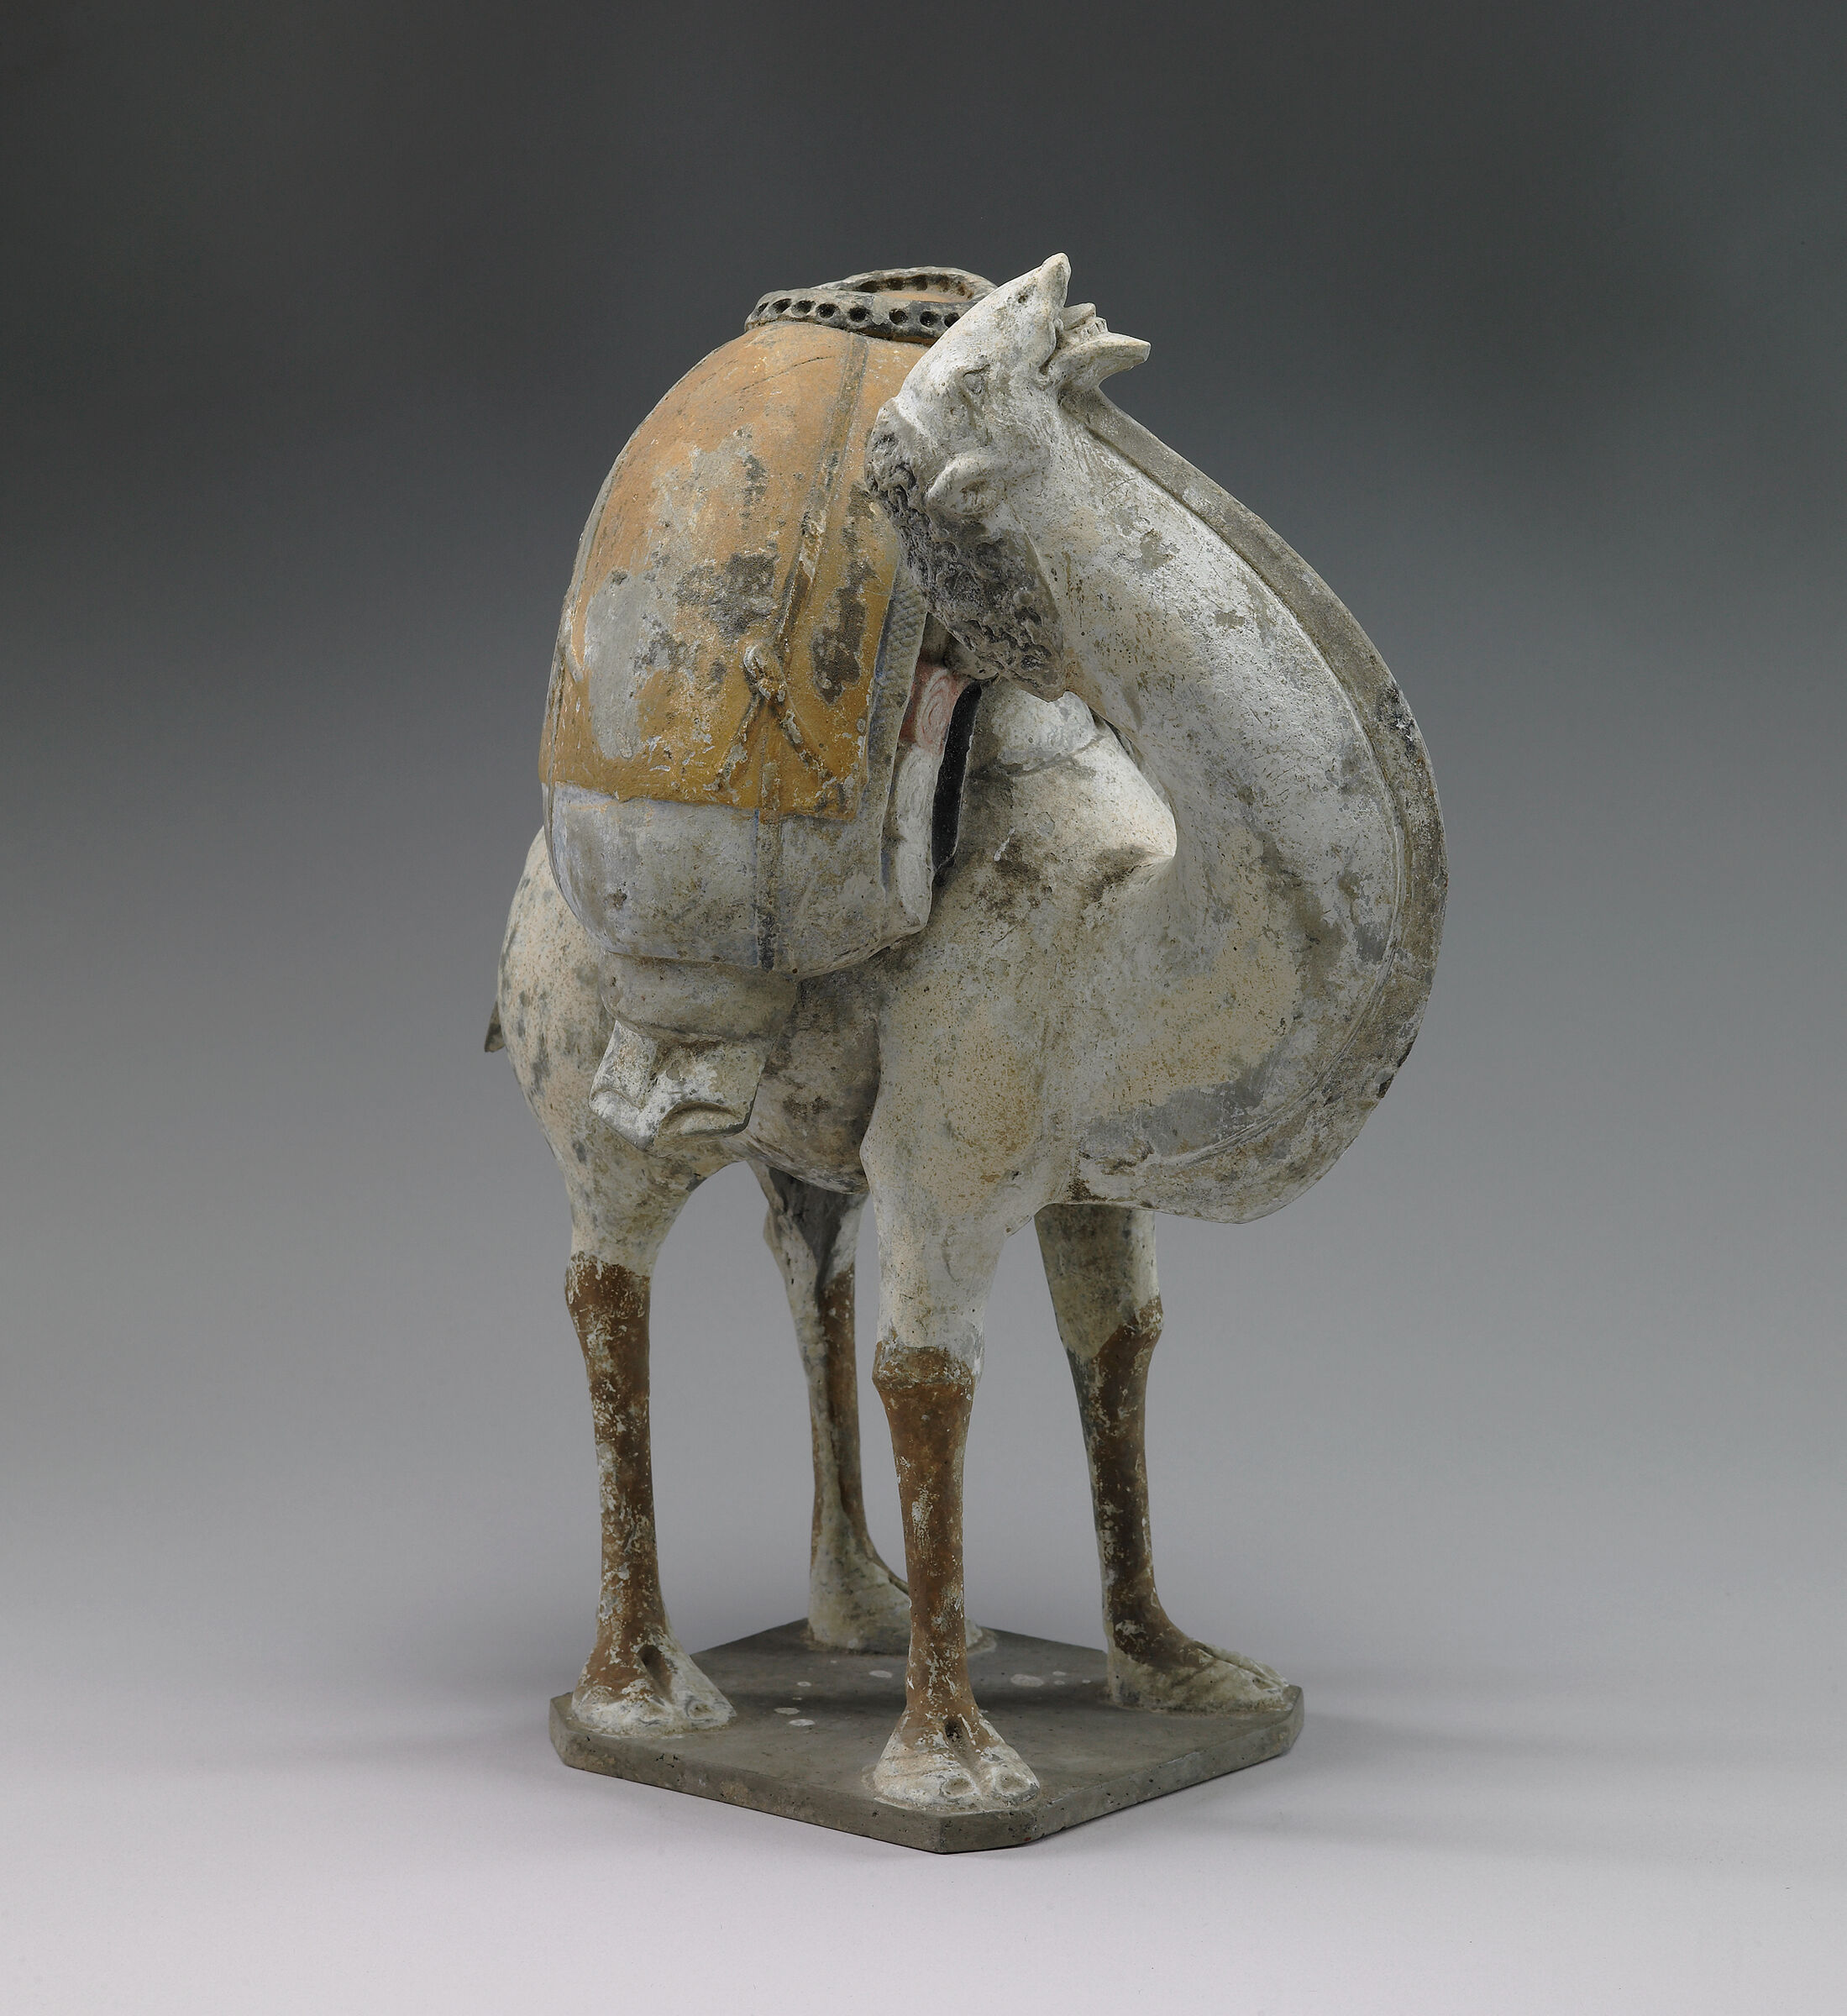 White-Colored Camel, From The Tomb Sculpture Set: Two Standing, Braying Camels, One Buff, One White, Their Backs Laden With Goods